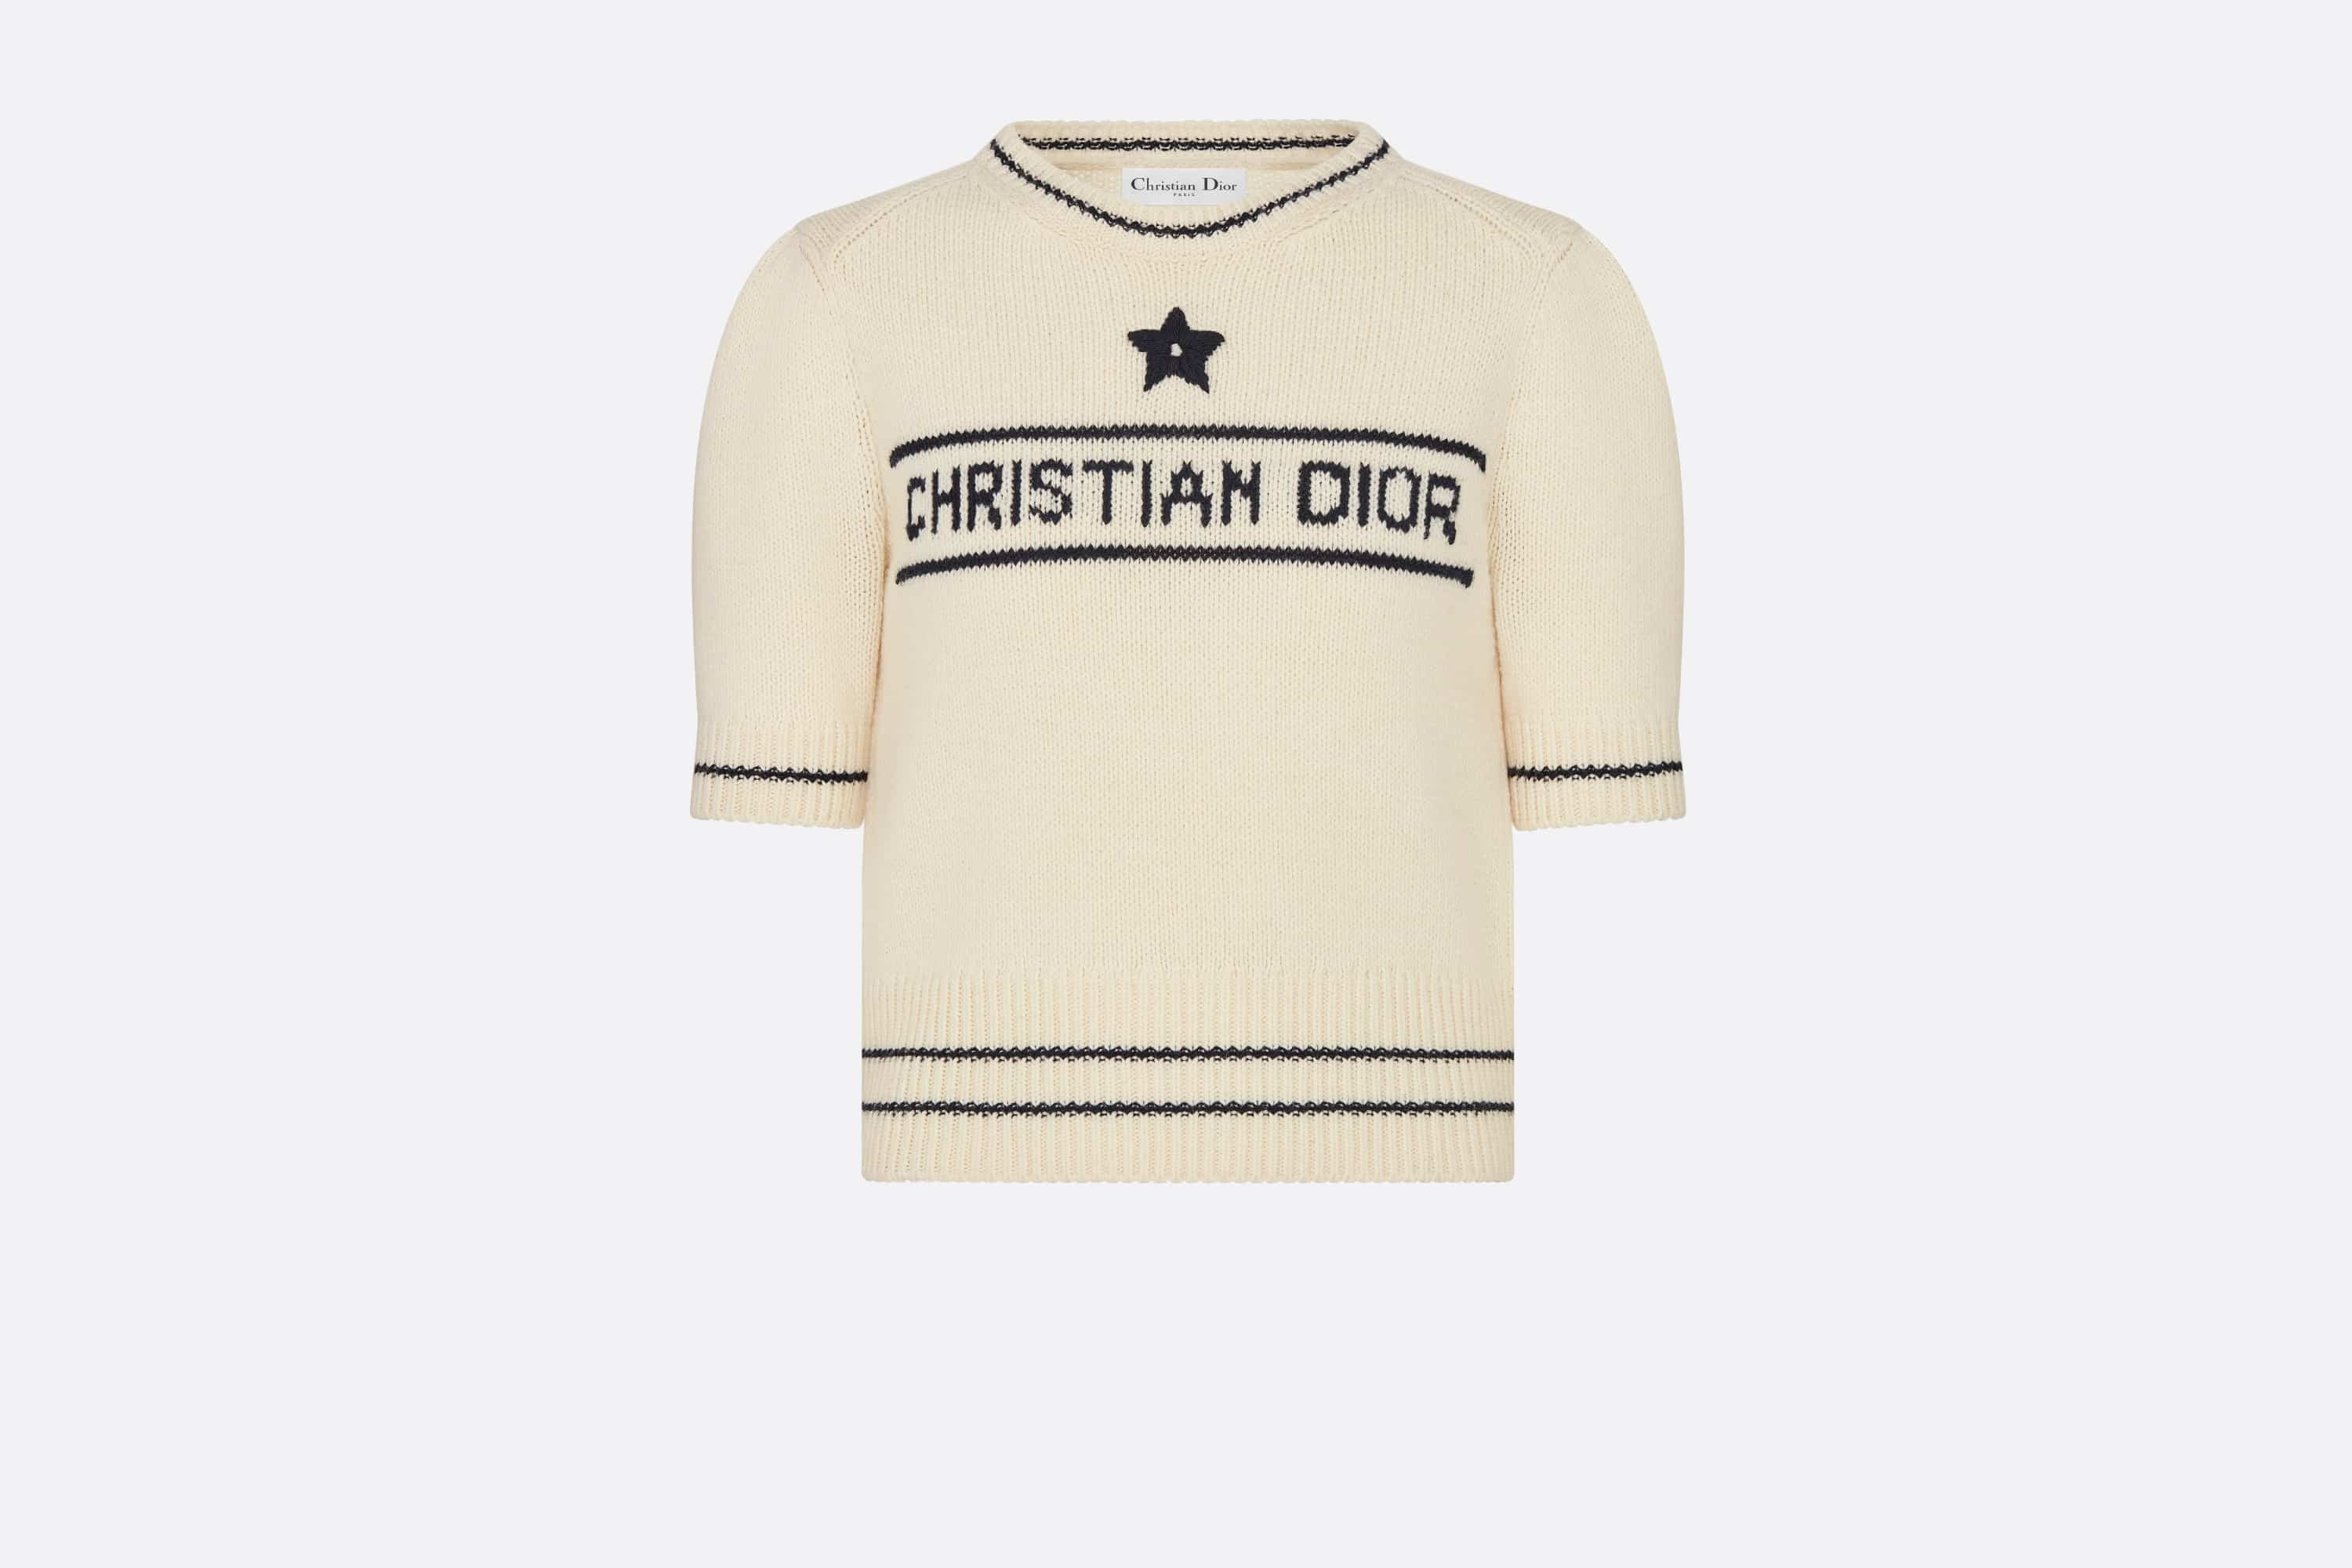 'CHRISTIAN DIOR' Short-Sleeved Sweater - 1